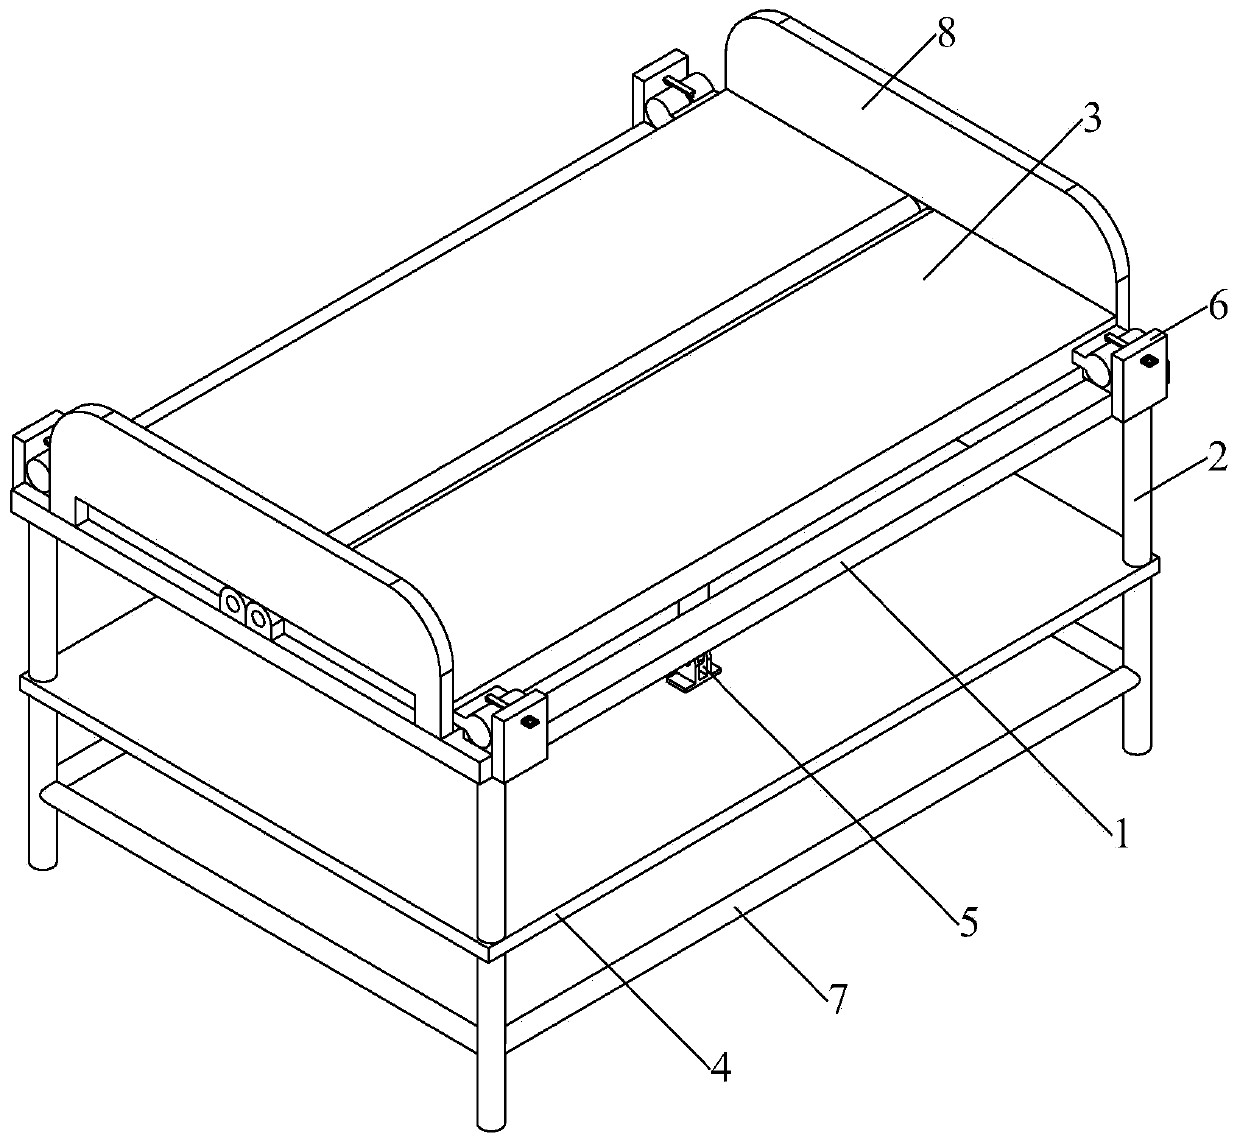 Bed board turnover device of medical bed